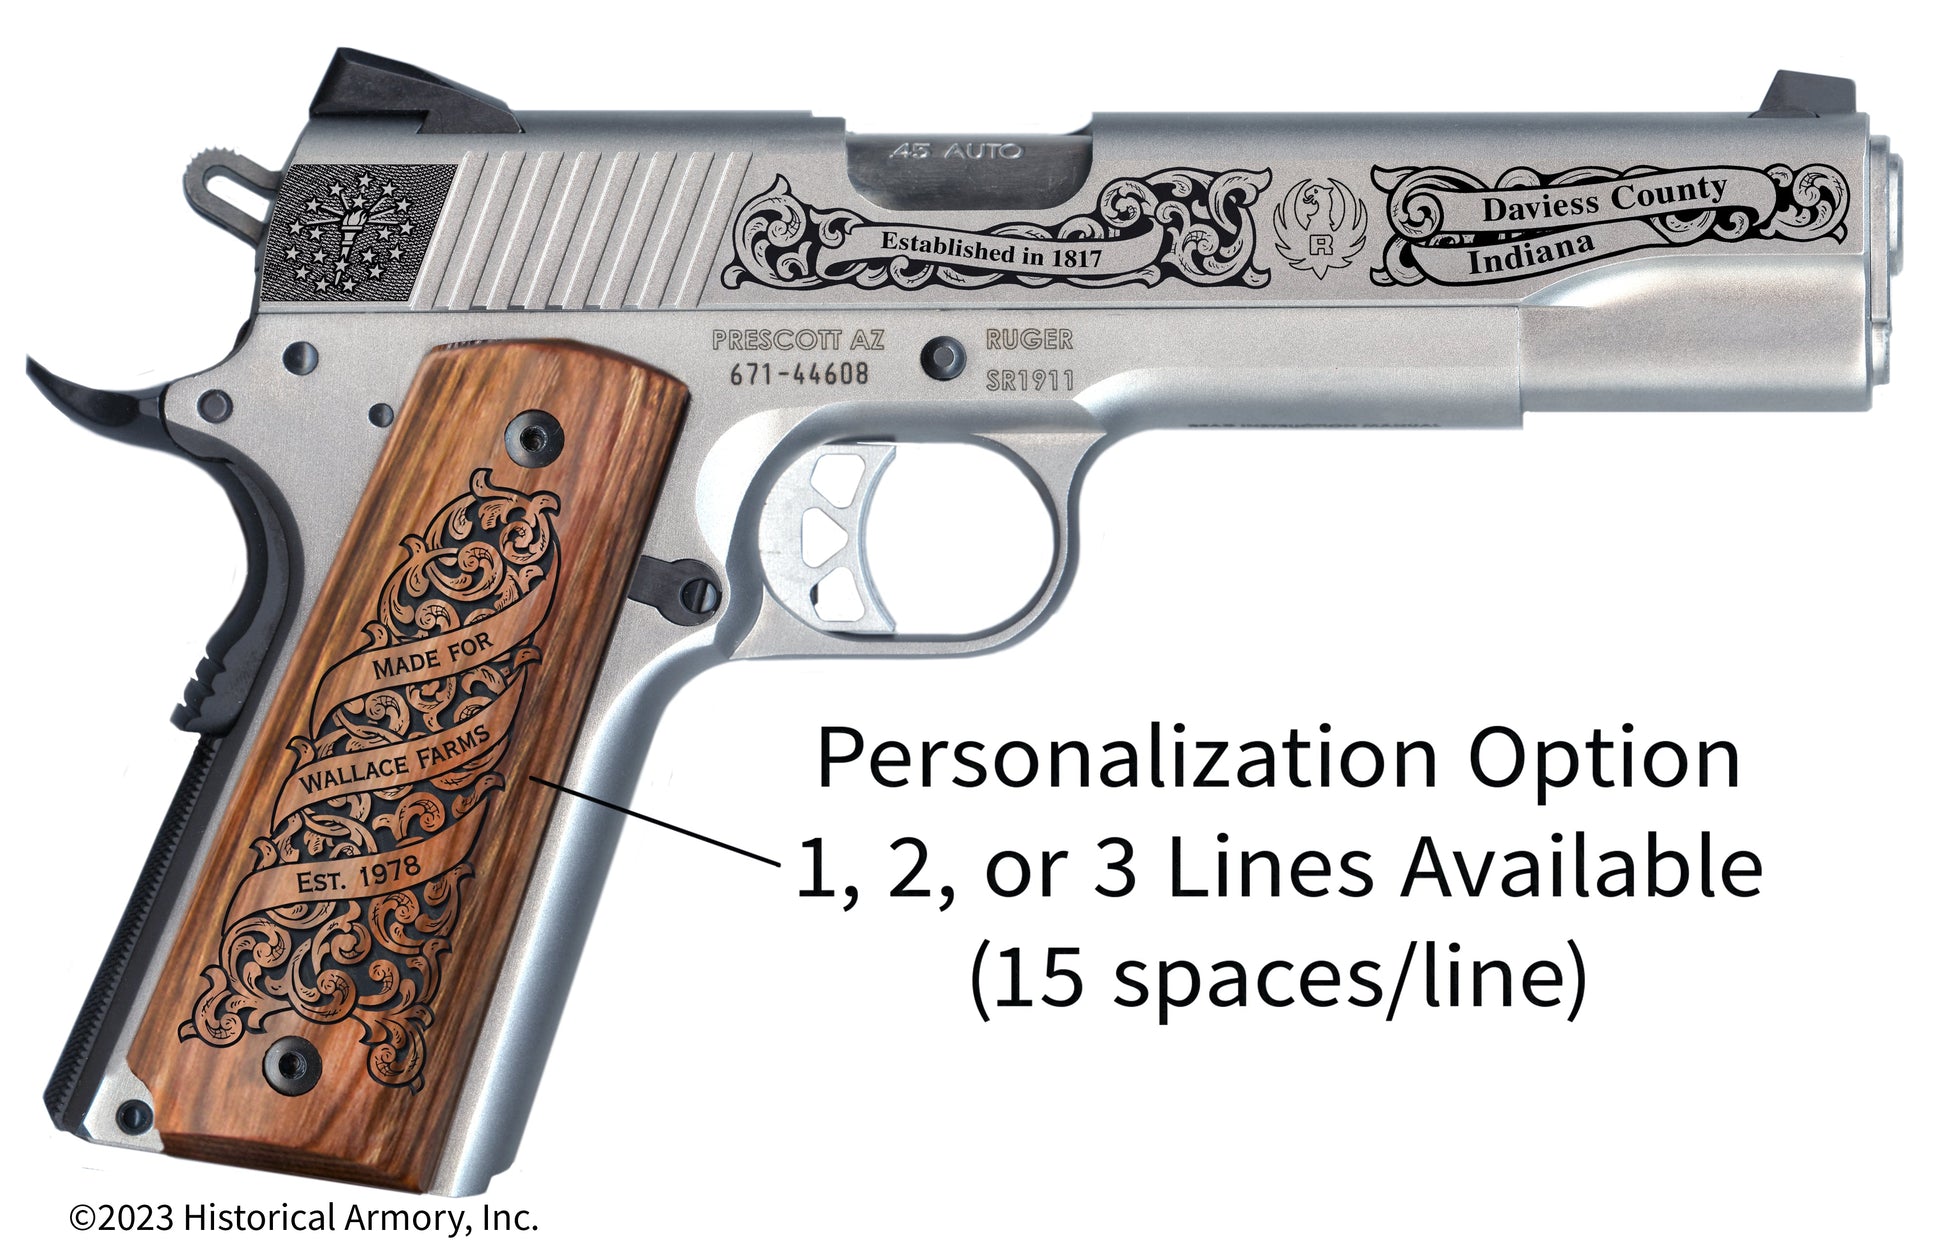 Daviess County Indiana Personalized Engraved .45 Auto Ruger 1911